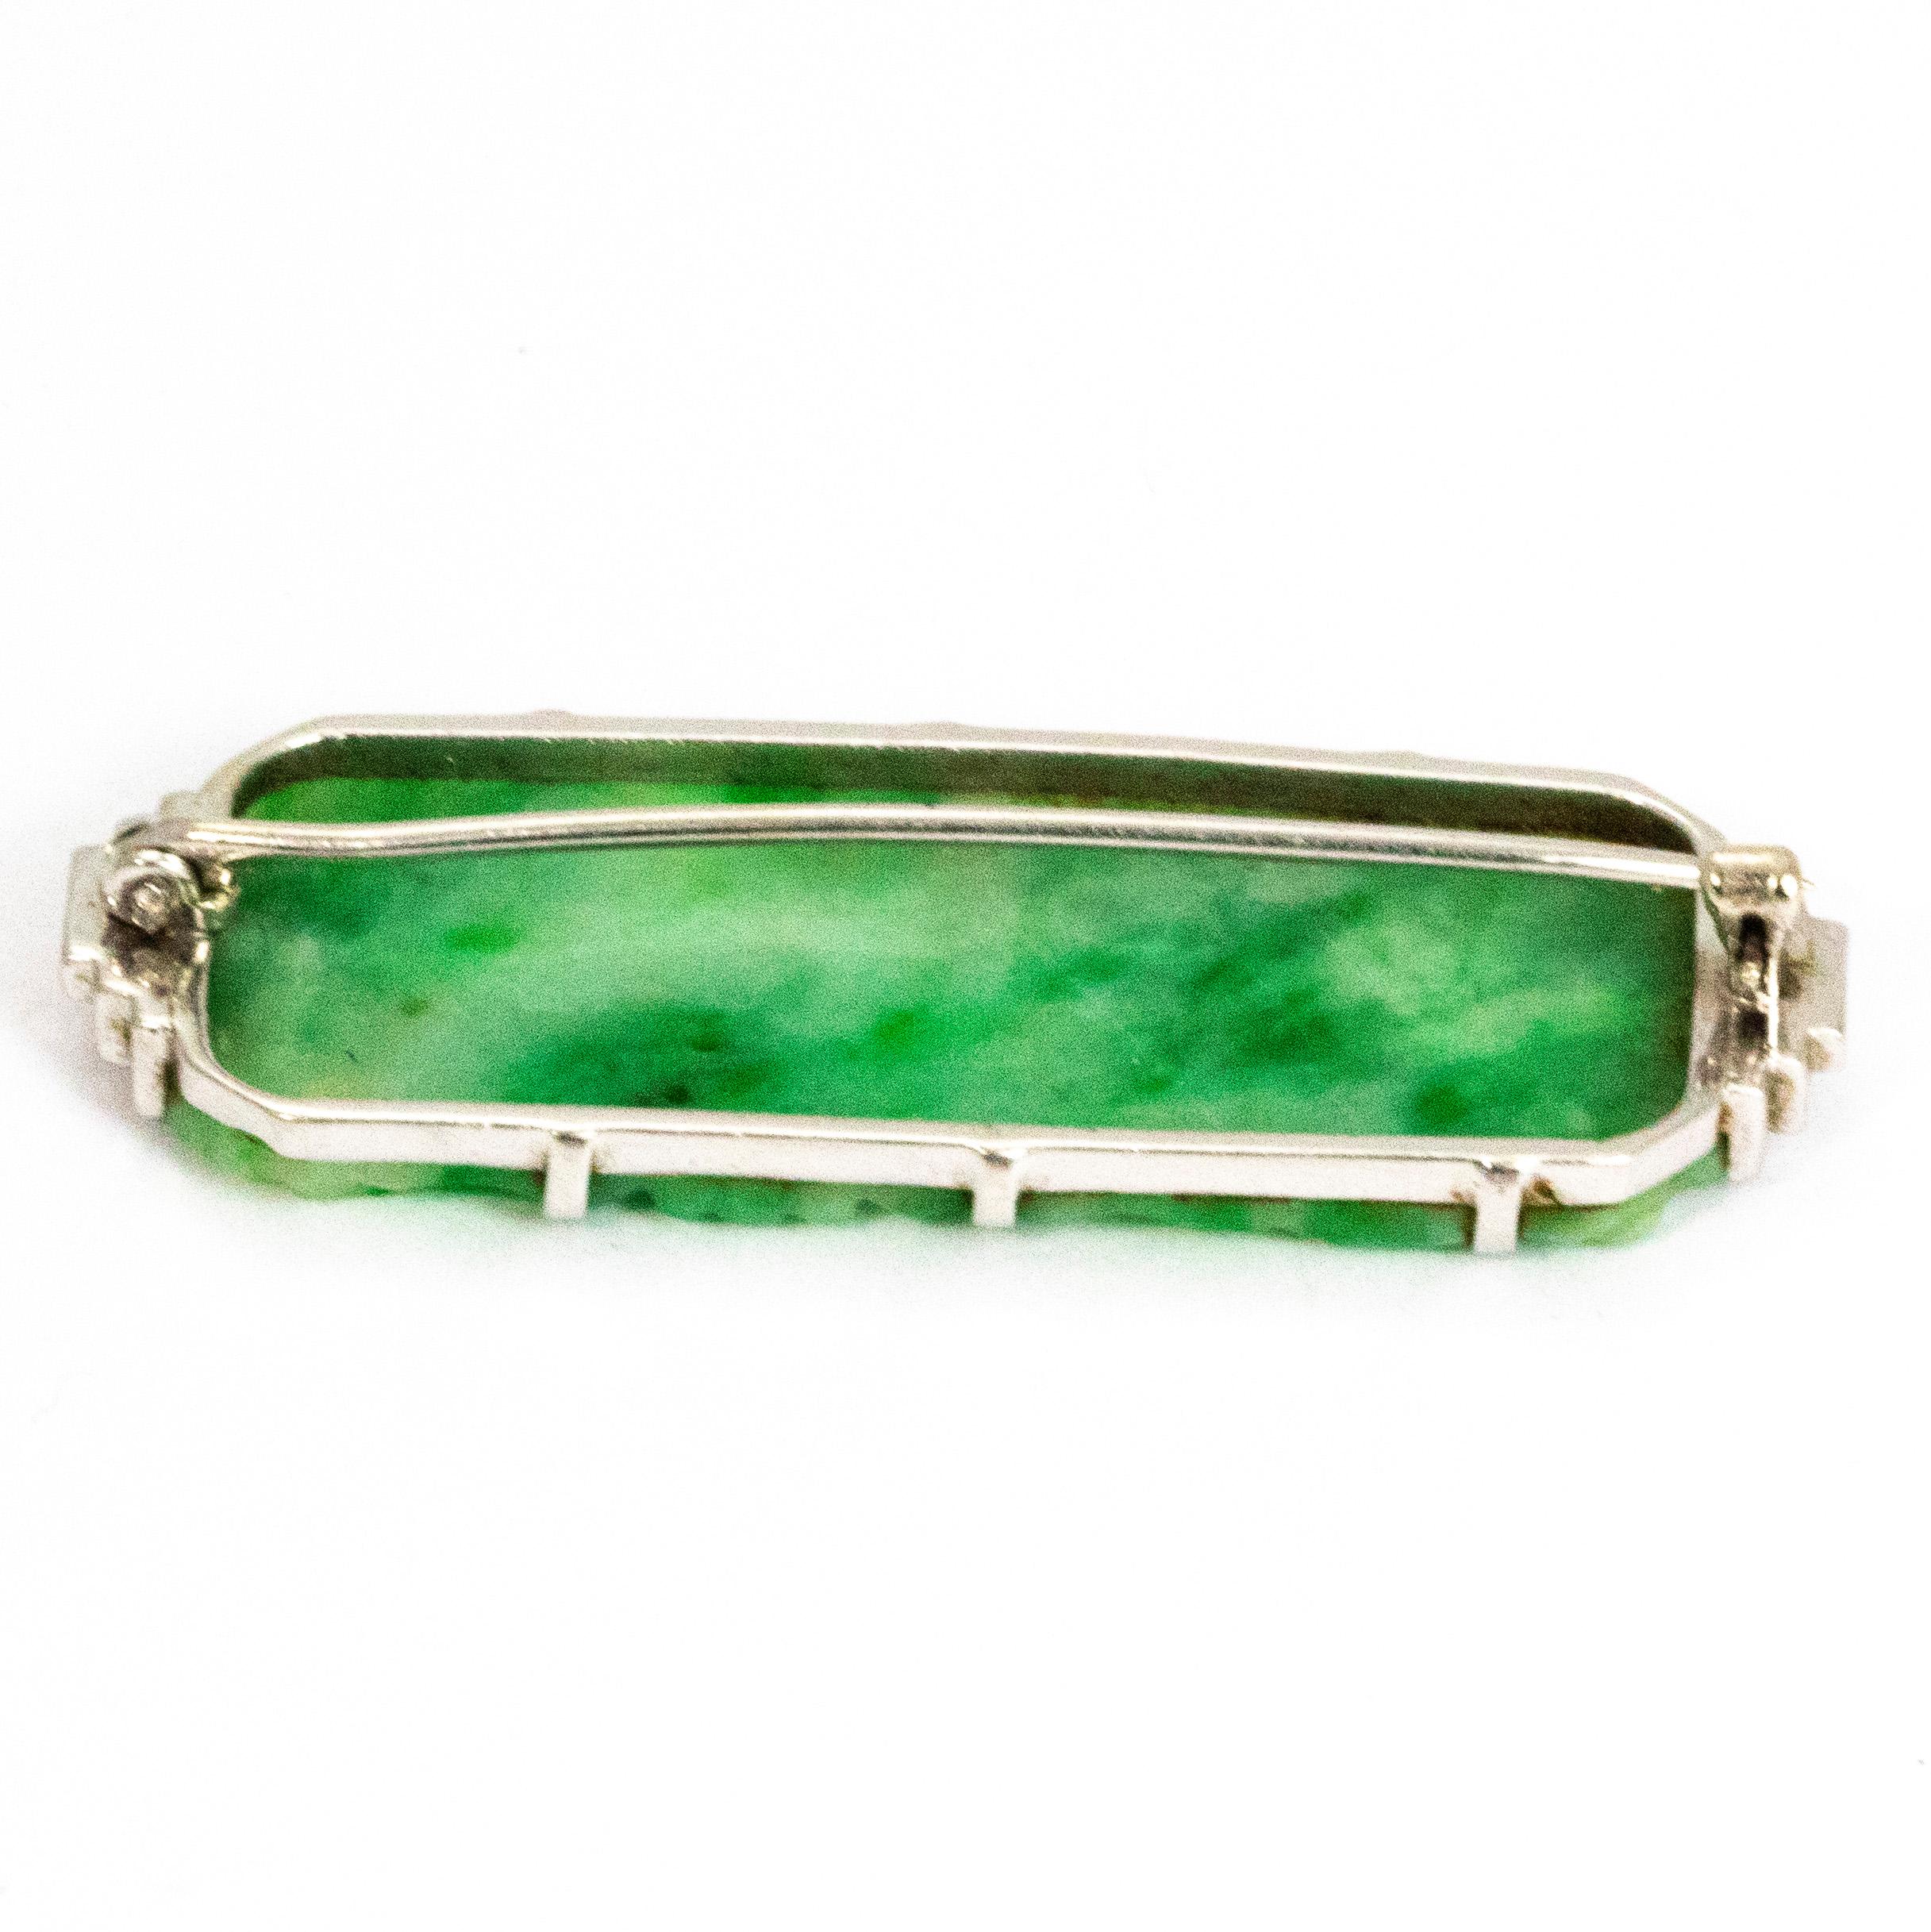 The engraving in this piece of jade is exquisite. The brooch has a classic Art Deco style to it which is shown with the white gold step detail either side of the stone. The glow when the light hits the jade is mesmerising. 

Brooch Domensions: 46mm